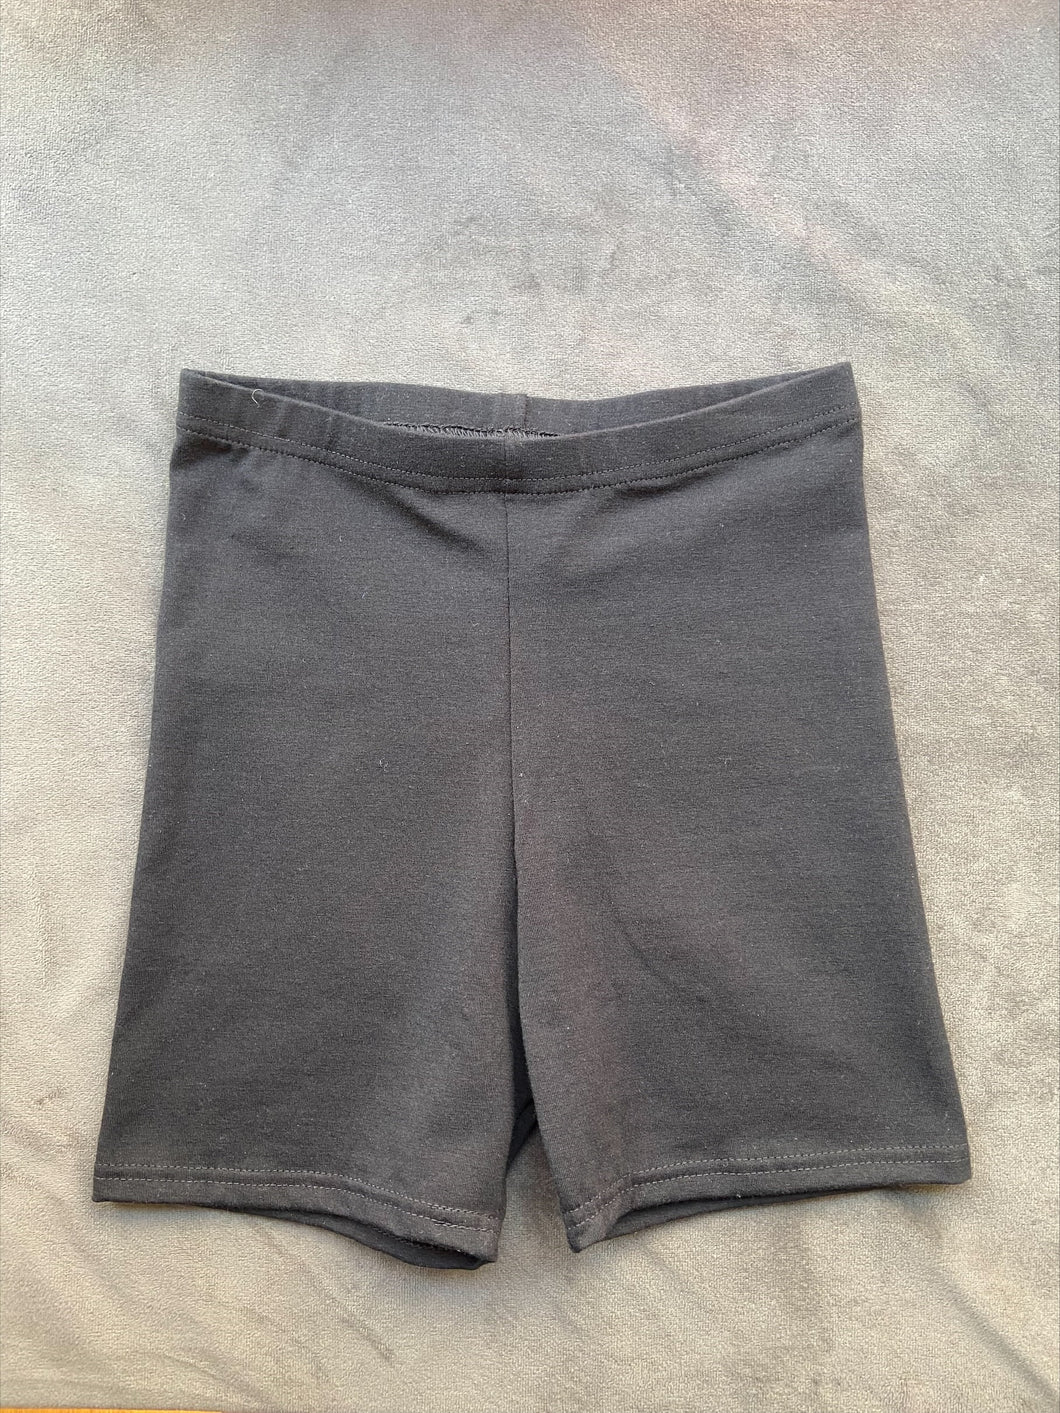 Tappers & Pointers cotton black hotpants